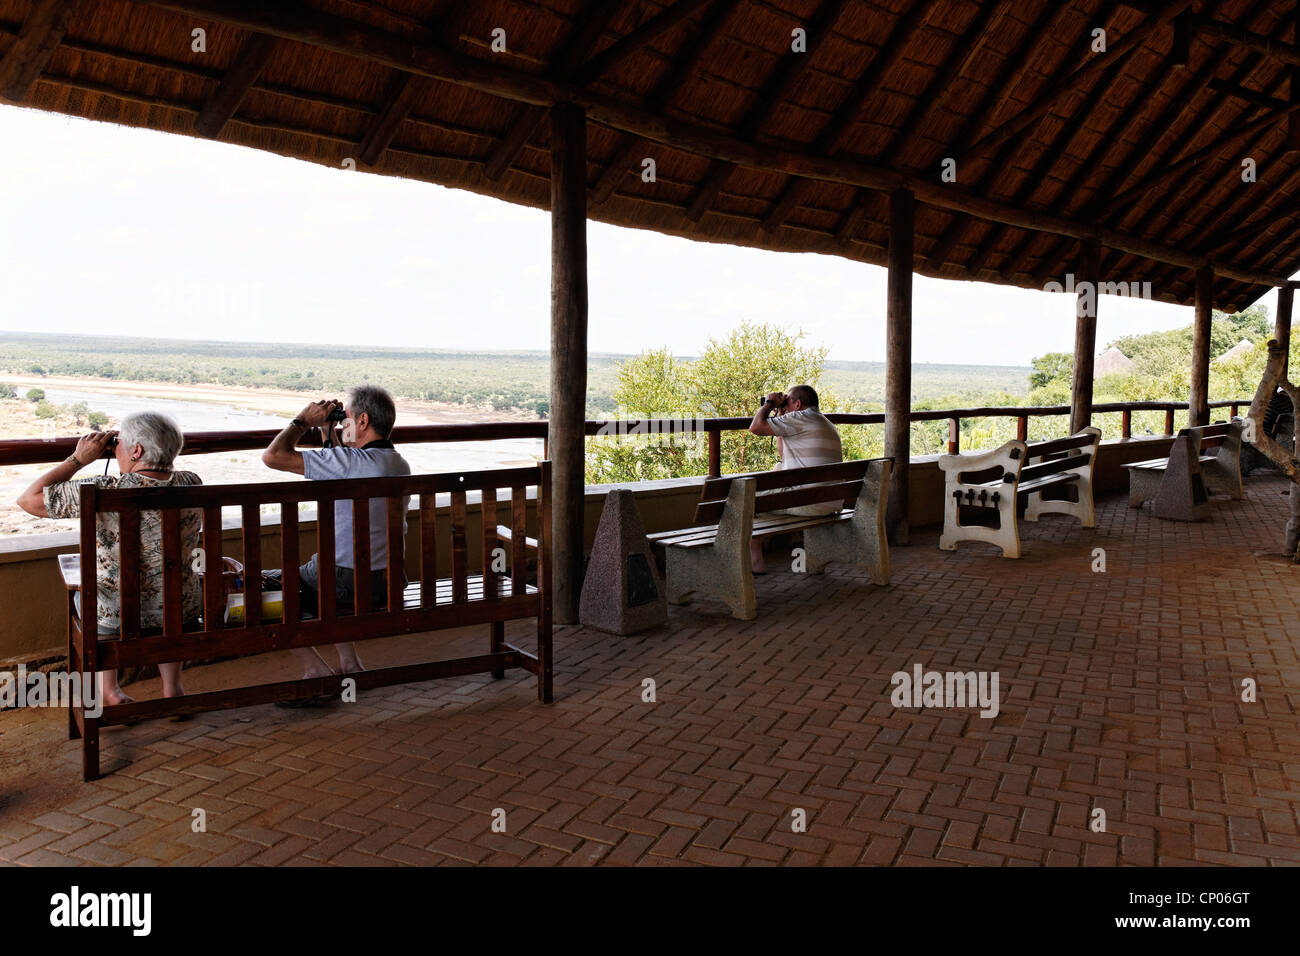 Olifants viewing deck to the bushveldt and Olifonts river, Kruger National Park, South Africa Stock Photo